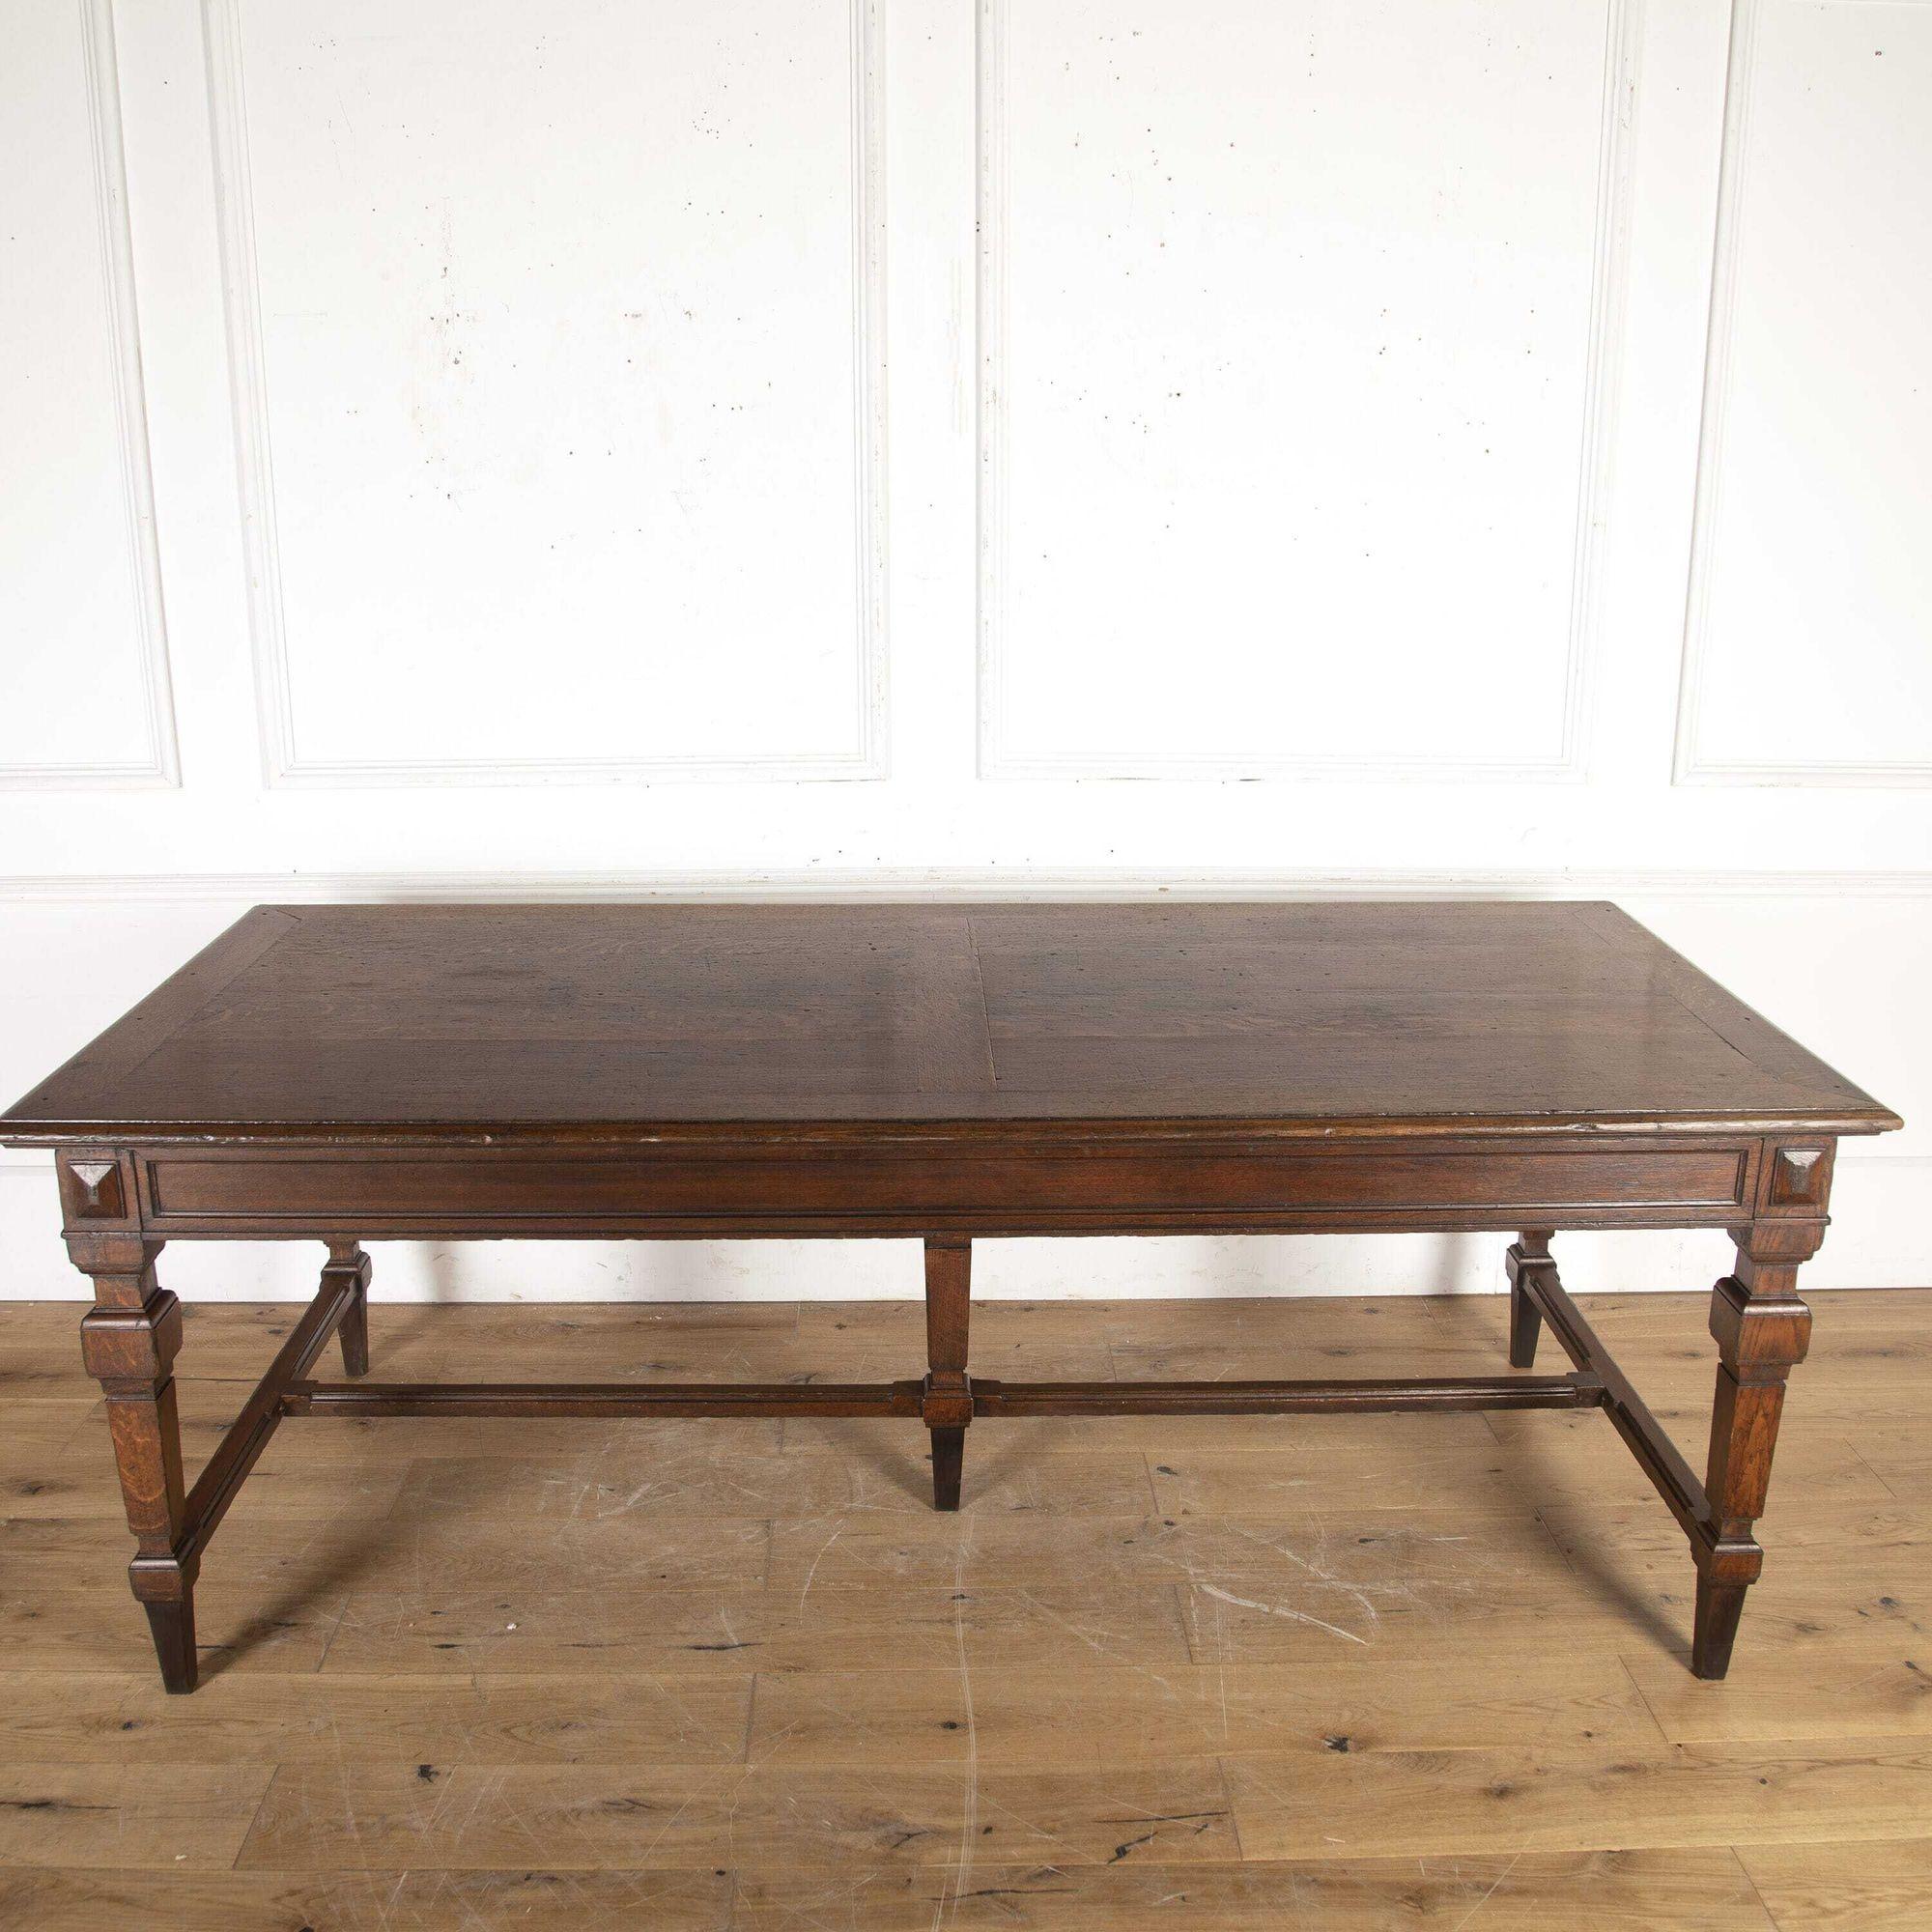 Large English oak dining table dating to the mid 19th century.
This wonderful table is of good country house form and condition.
The top features an unusual design with inset panels and very attractive colouring. 
The frieze is panelled in the